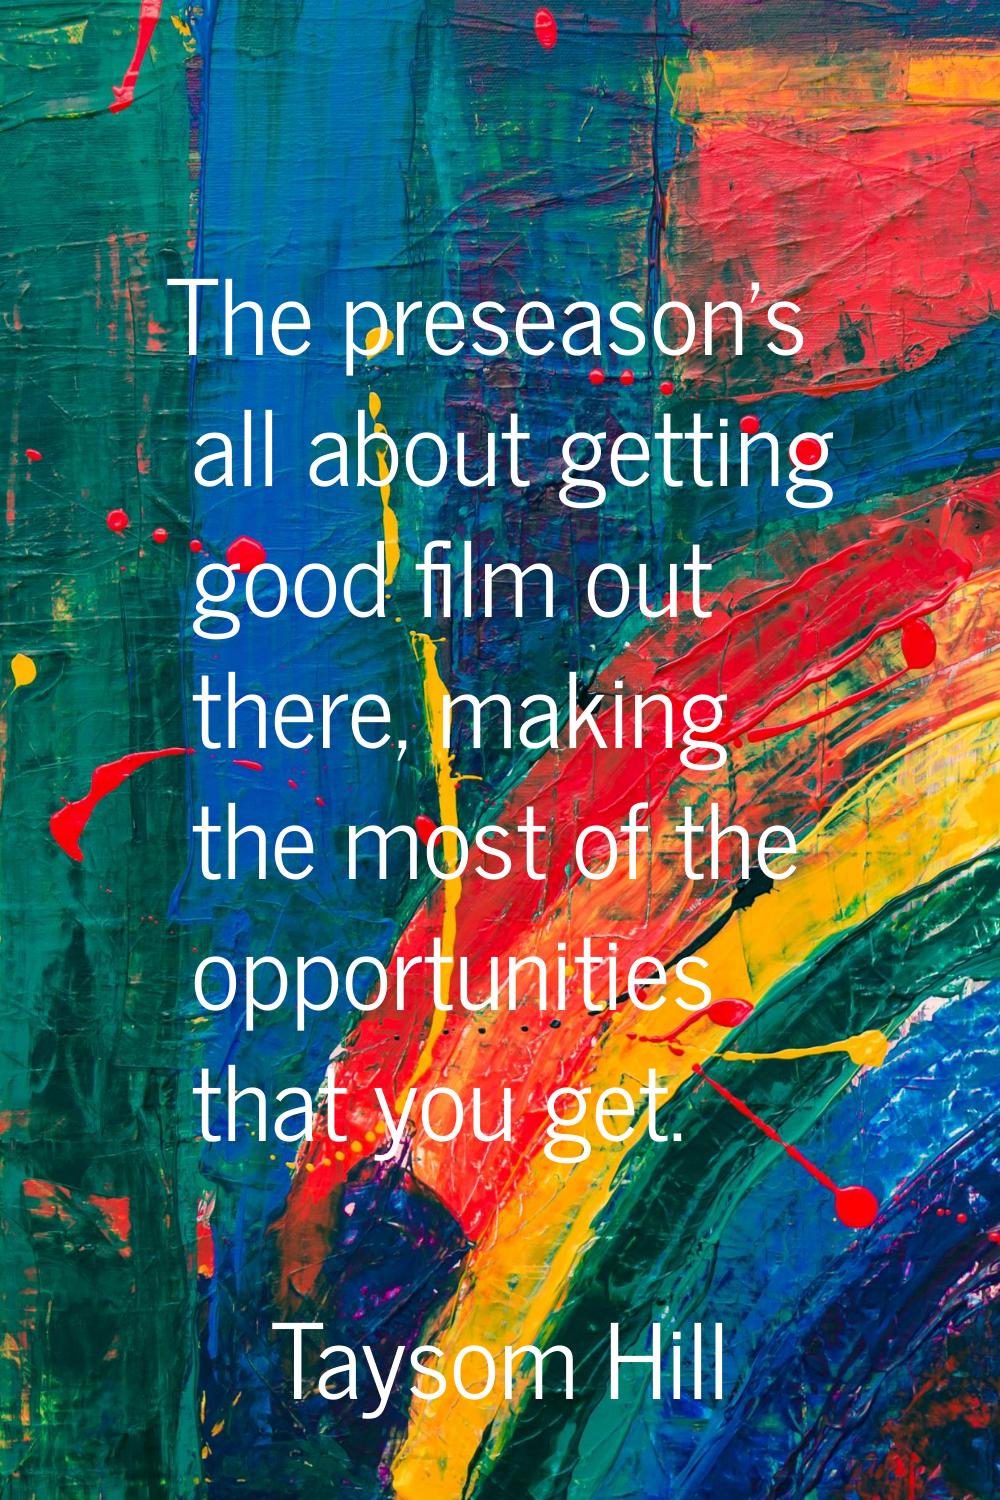 The preseason's all about getting good film out there, making the most of the opportunities that yo